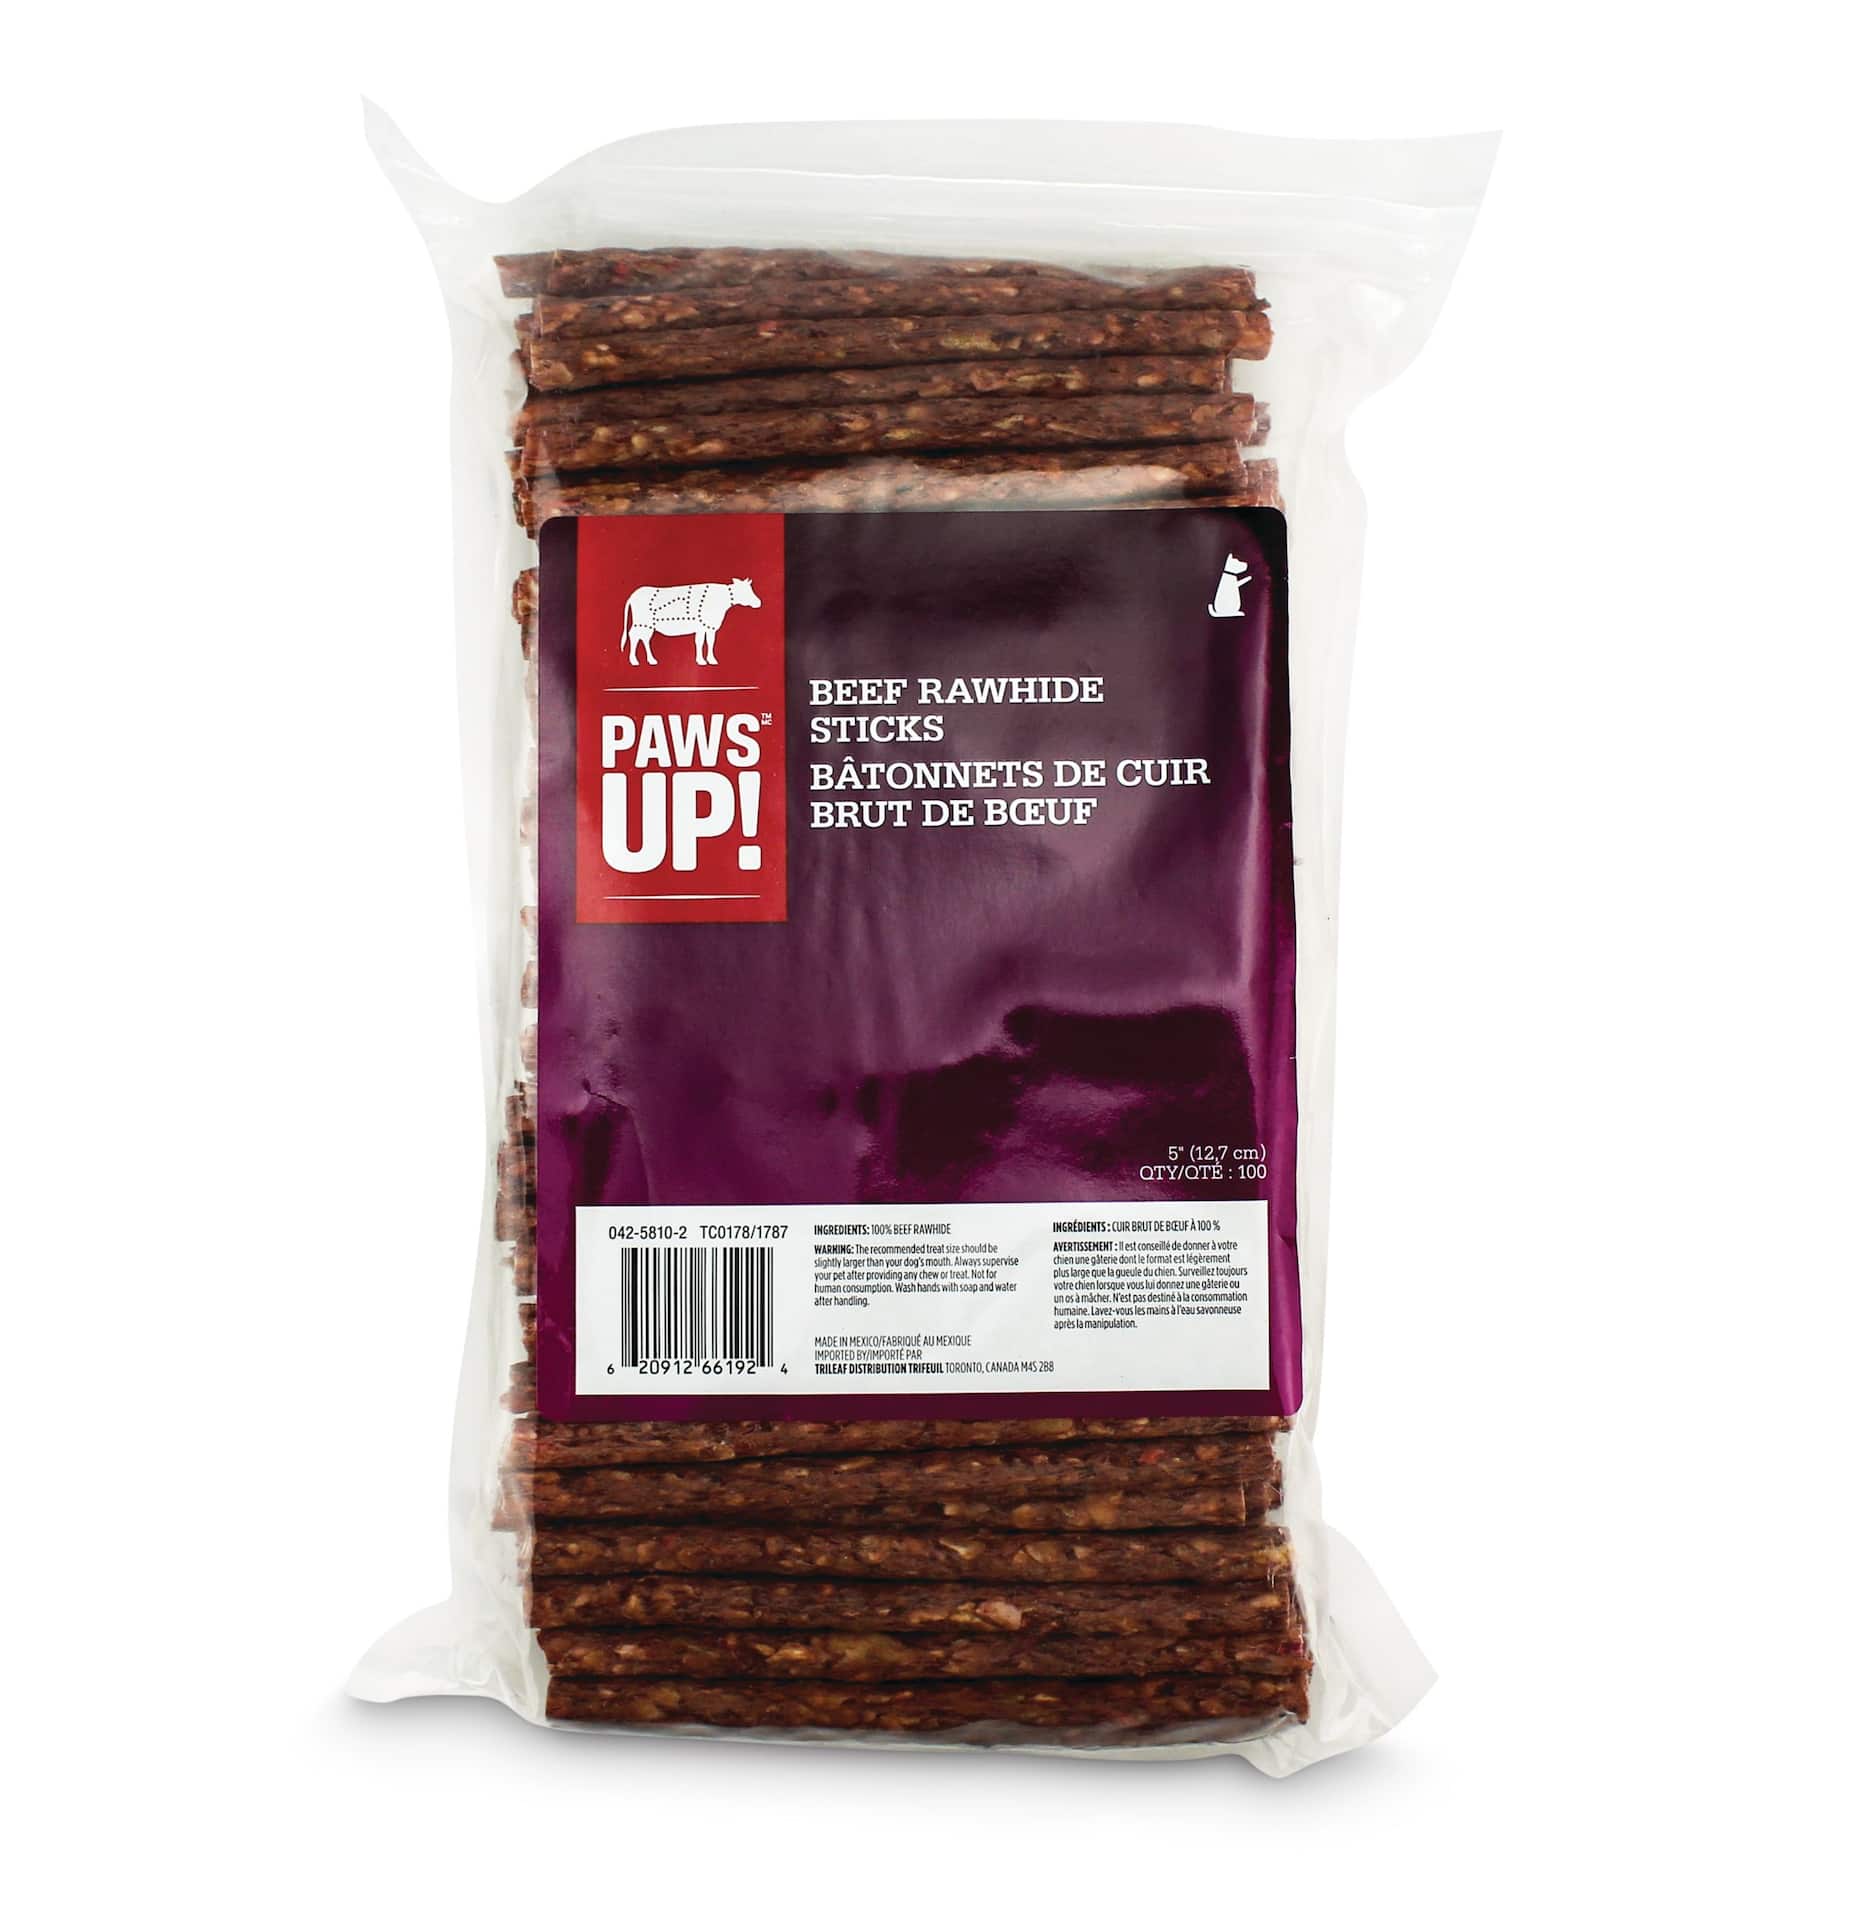 https://media-www.canadiantire.ca/product/living/pet-care/pet-food/0425810/natural-munchy-stick-100-pack-00cd83ad-db27-41e2-a24a-33a08632a394-jpgrendition.jpg